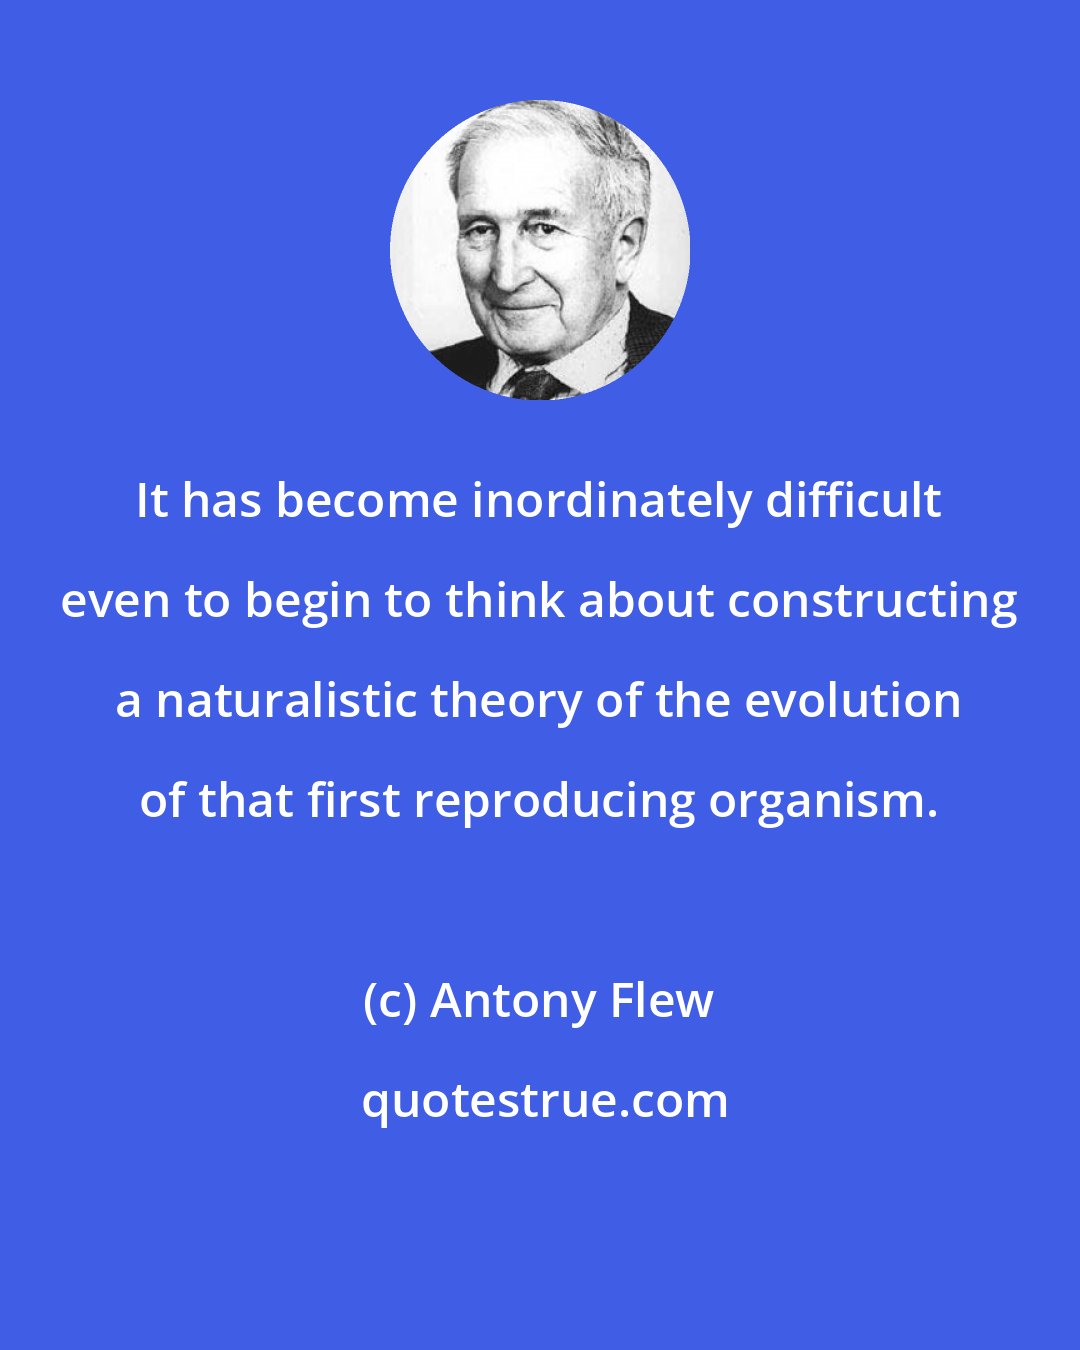 Antony Flew: It has become inordinately difficult even to begin to think about constructing a naturalistic theory of the evolution of that first reproducing organism.